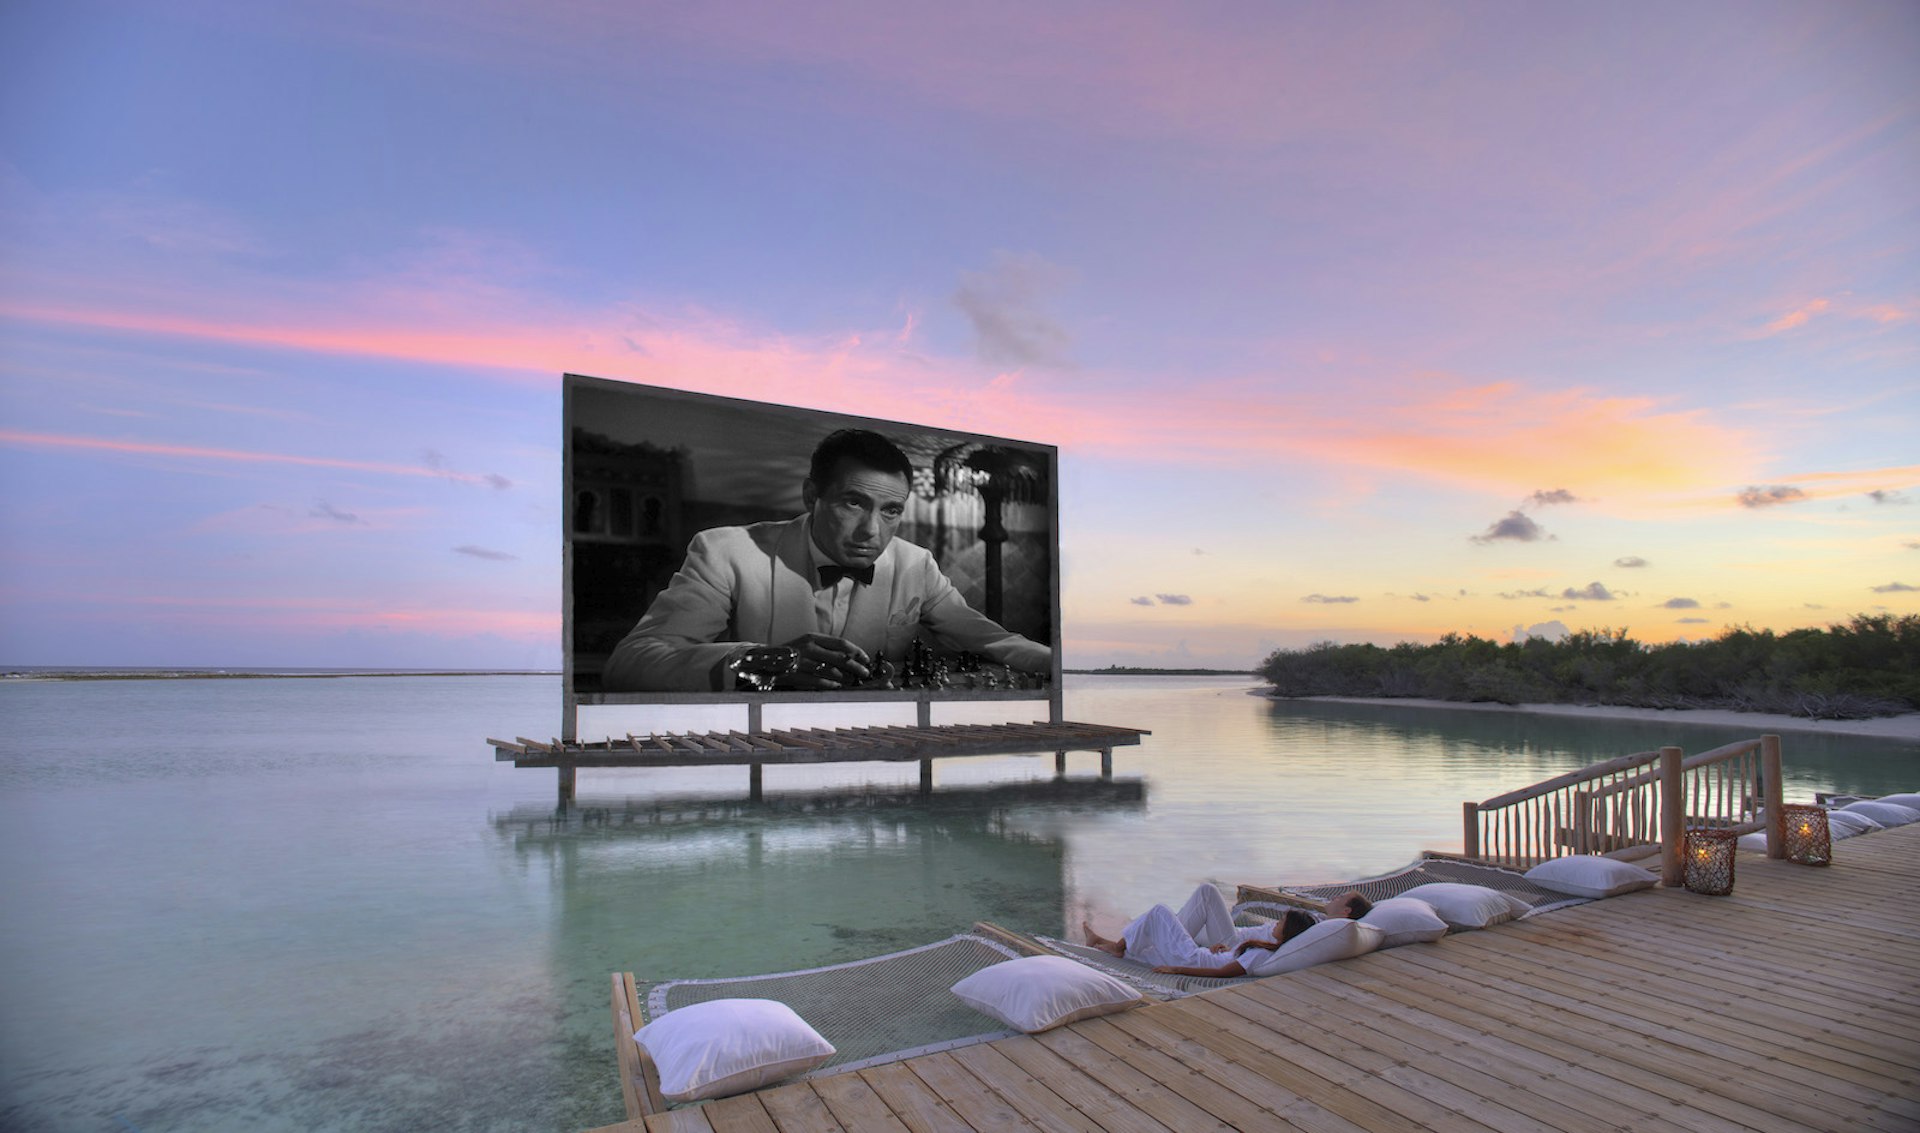 A large screen is set up on a floating terrace showing Casablanca. The sky is lit up by a beautiful sunset in the background.